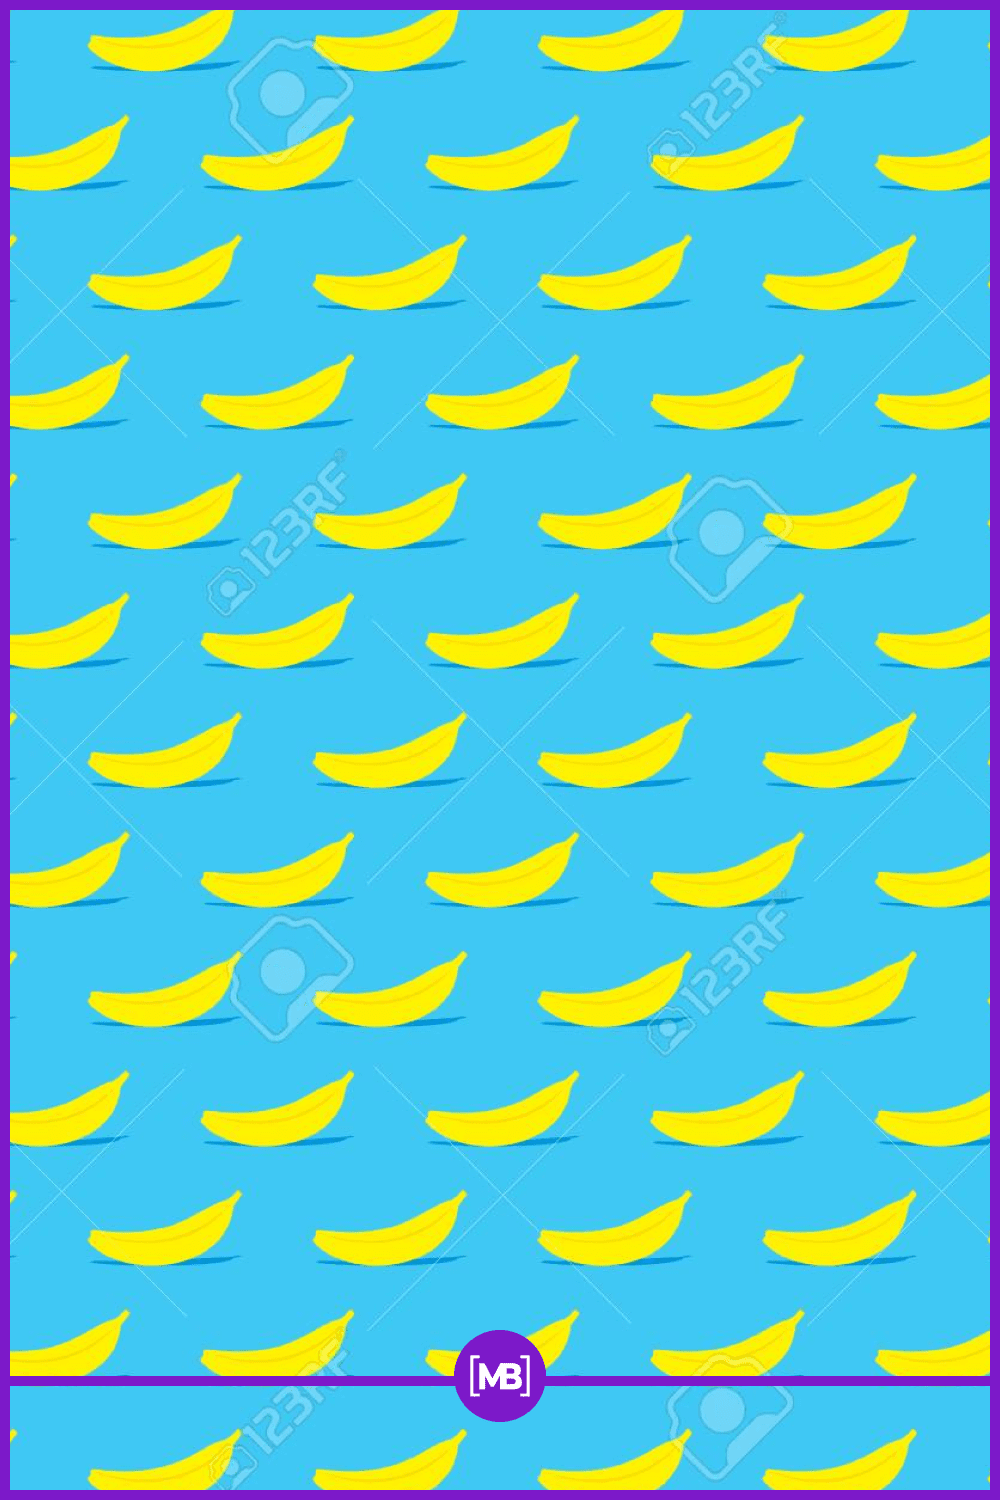 Simple yellow bananas on the blue background.